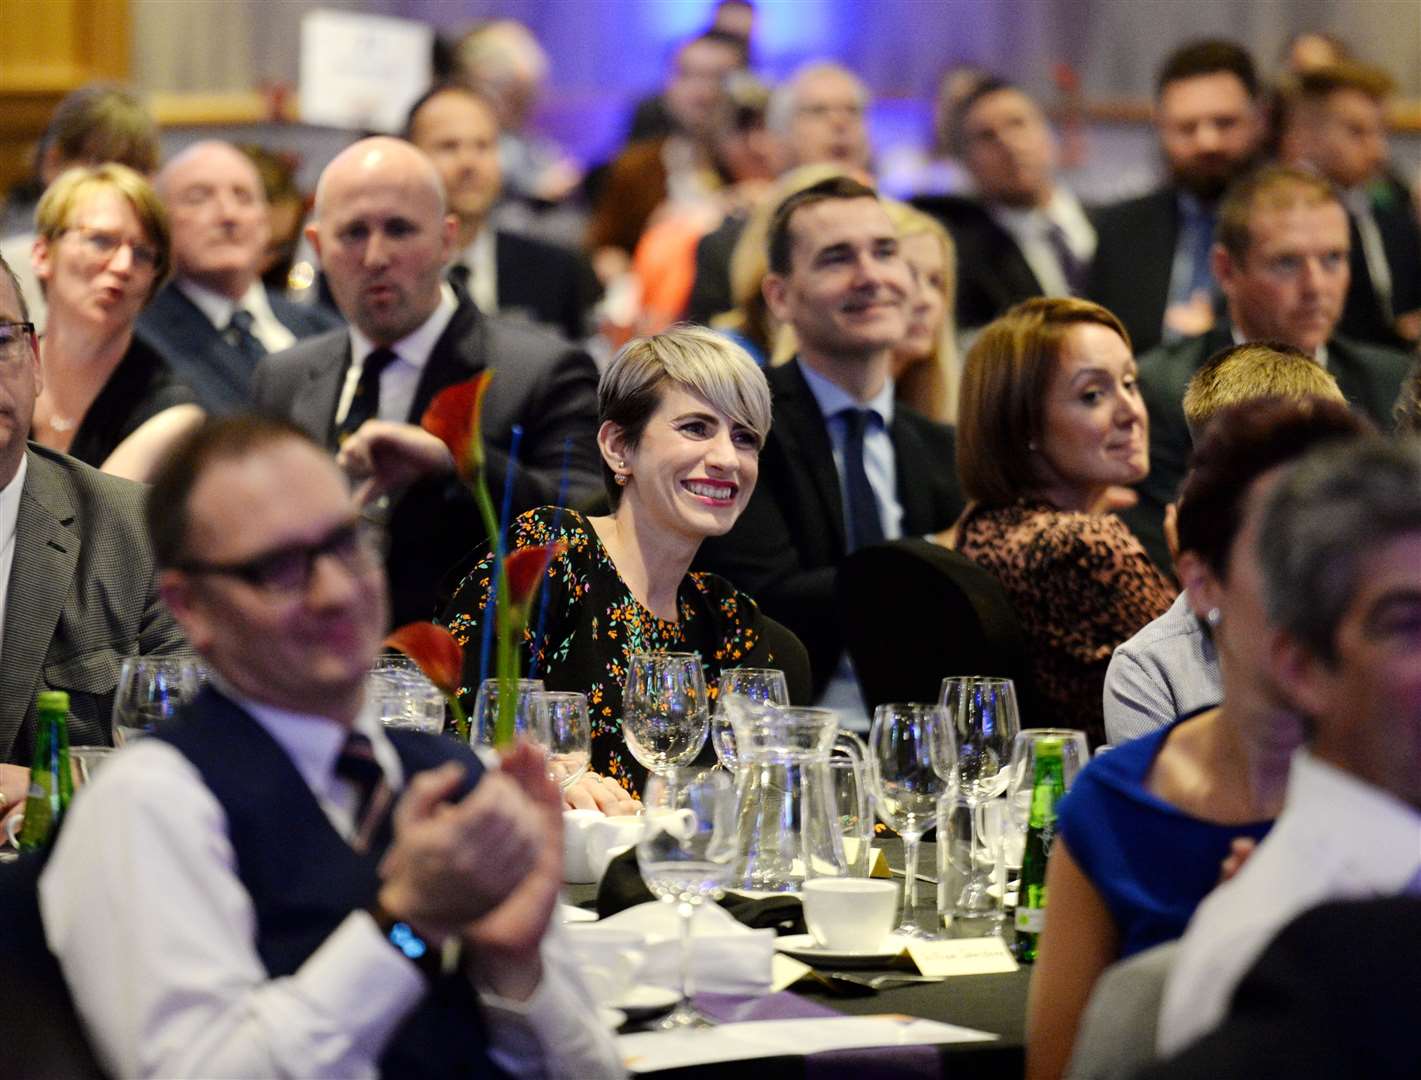 Capacity will be reduced this year, but the 2021 Highland Business Awards will still provide a chance to get together and celebrate. Picture: Gary Anthony.